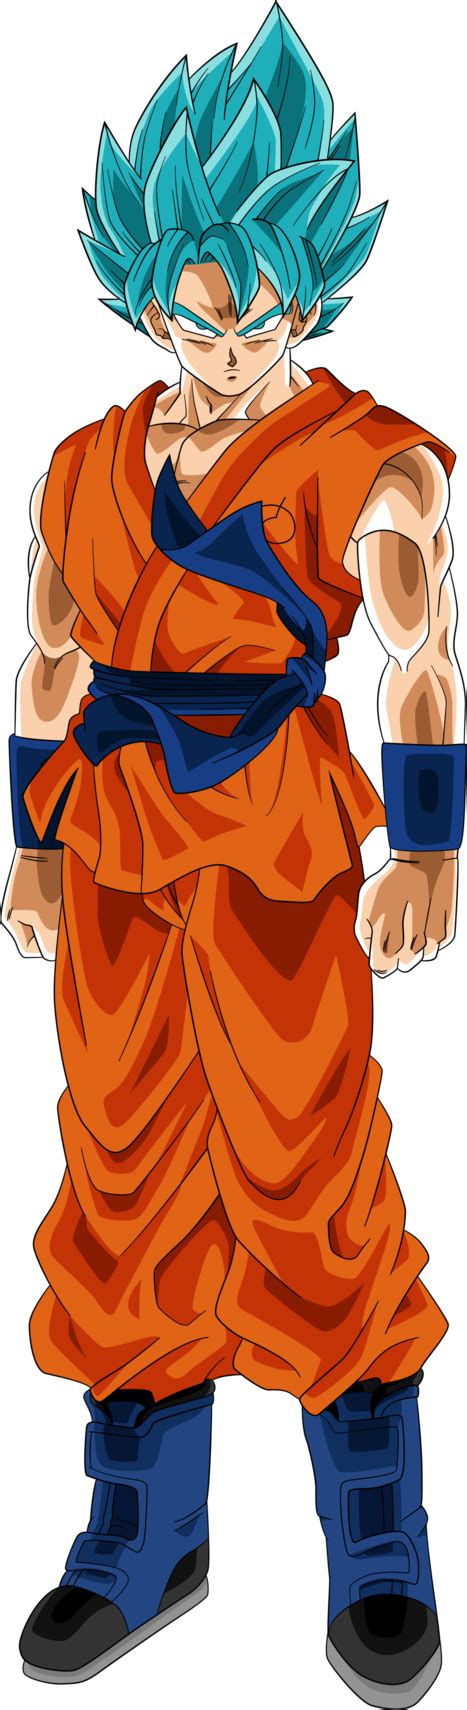 Ssgss Goku Dragonball Heroes Alt Palette 2 By Rayzorblade189 On